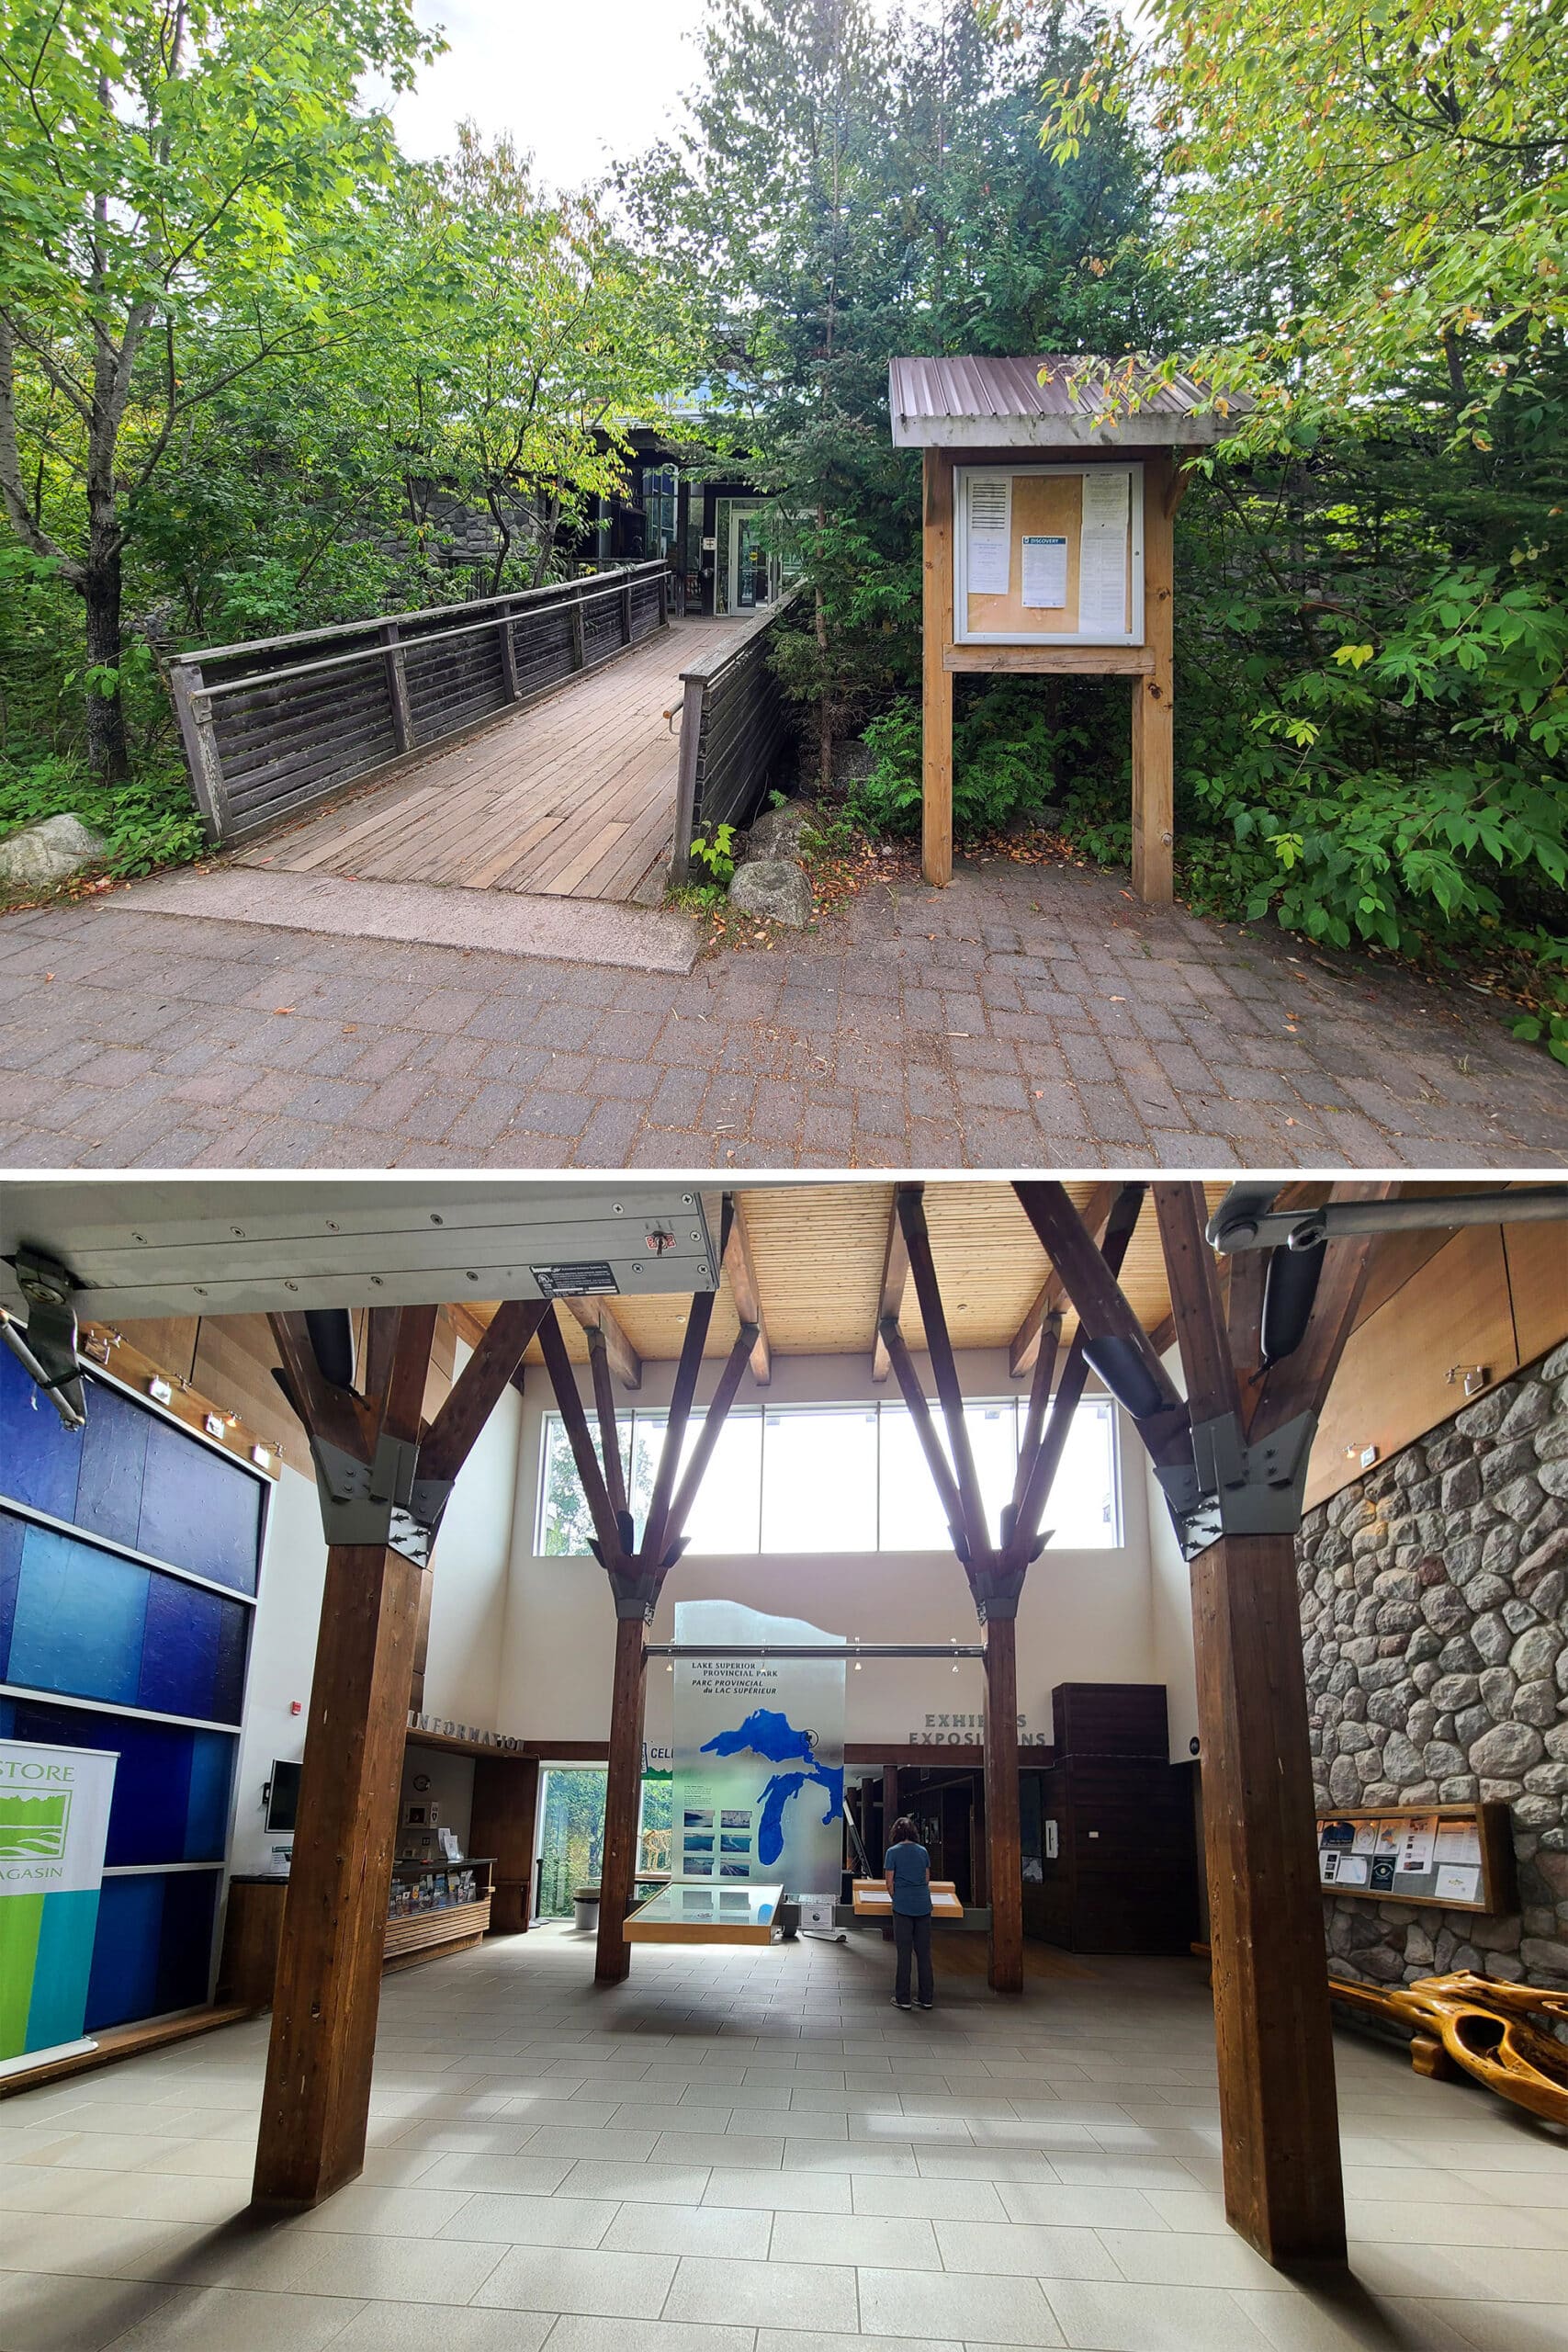 2 part image showing the interior and exterior of the Agawa bay visitor center.